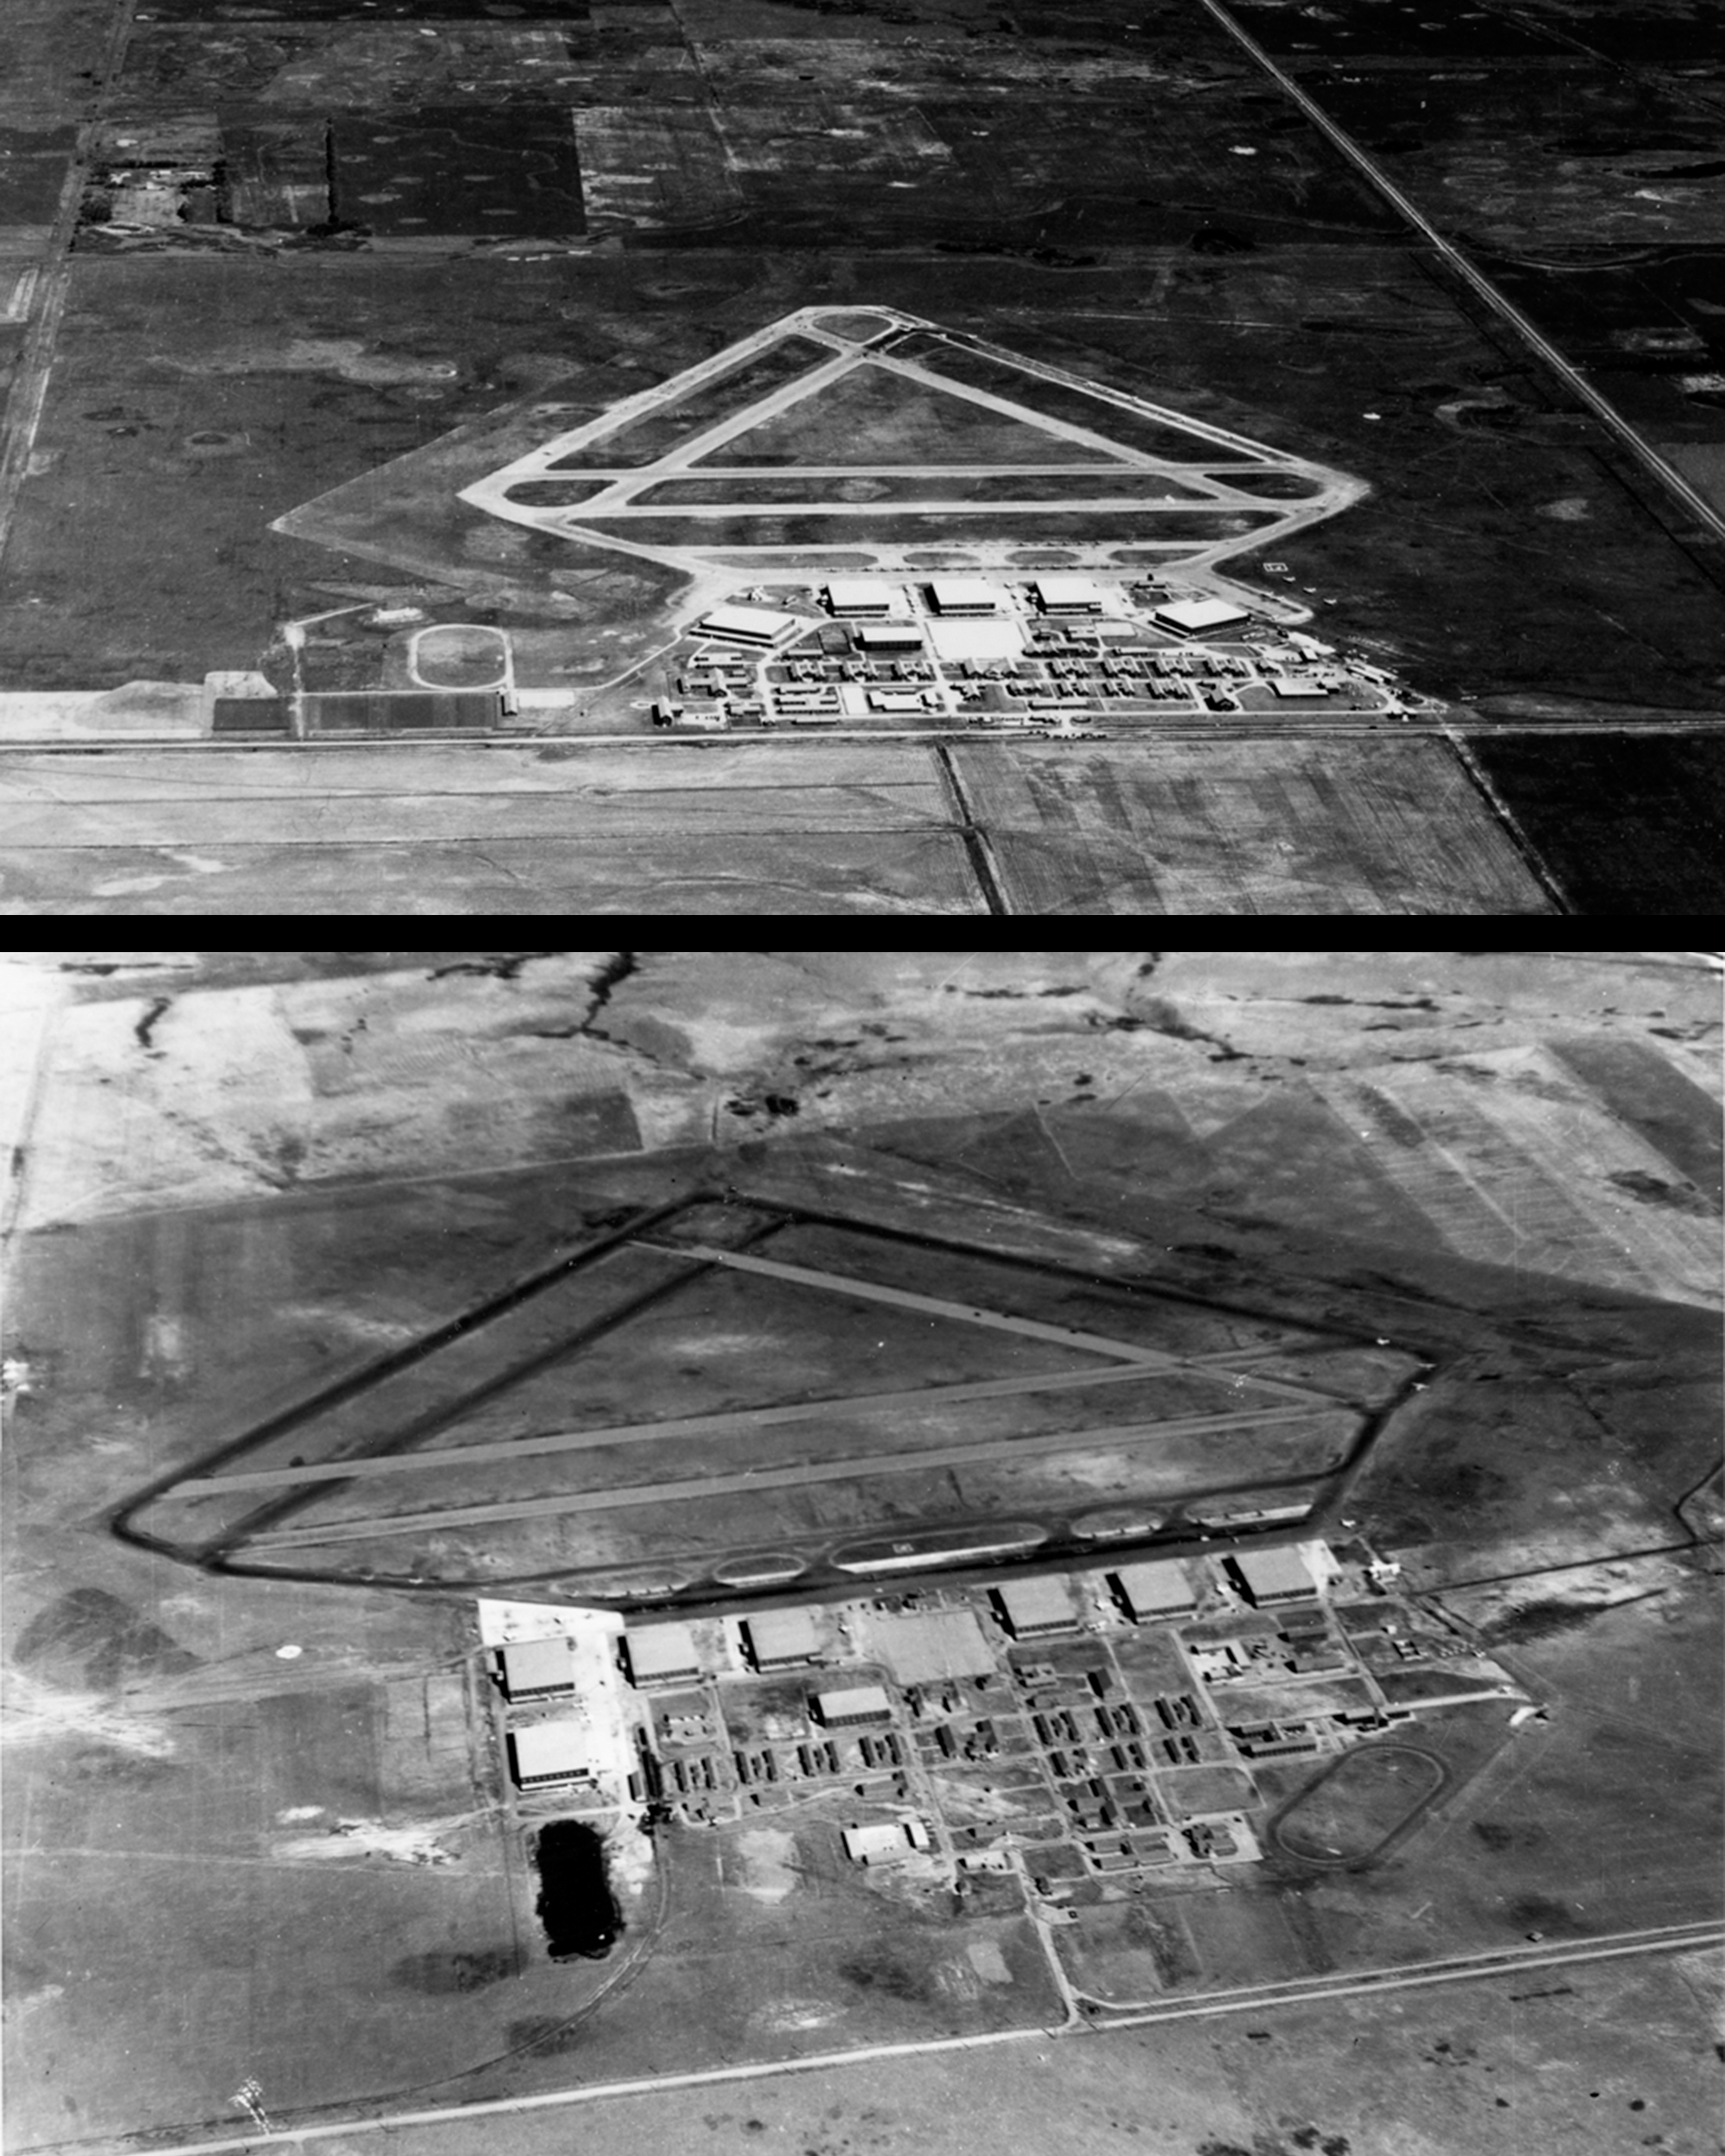 No. 12 Service Flying Training School at RCAF Brandon, Manitoba (top), and No. 39 SFTS at RCAF Swift Current, Saskatchewan, exhibit the standard British Commonwealth Air Training Plan airfield layout. PHOTO: DND